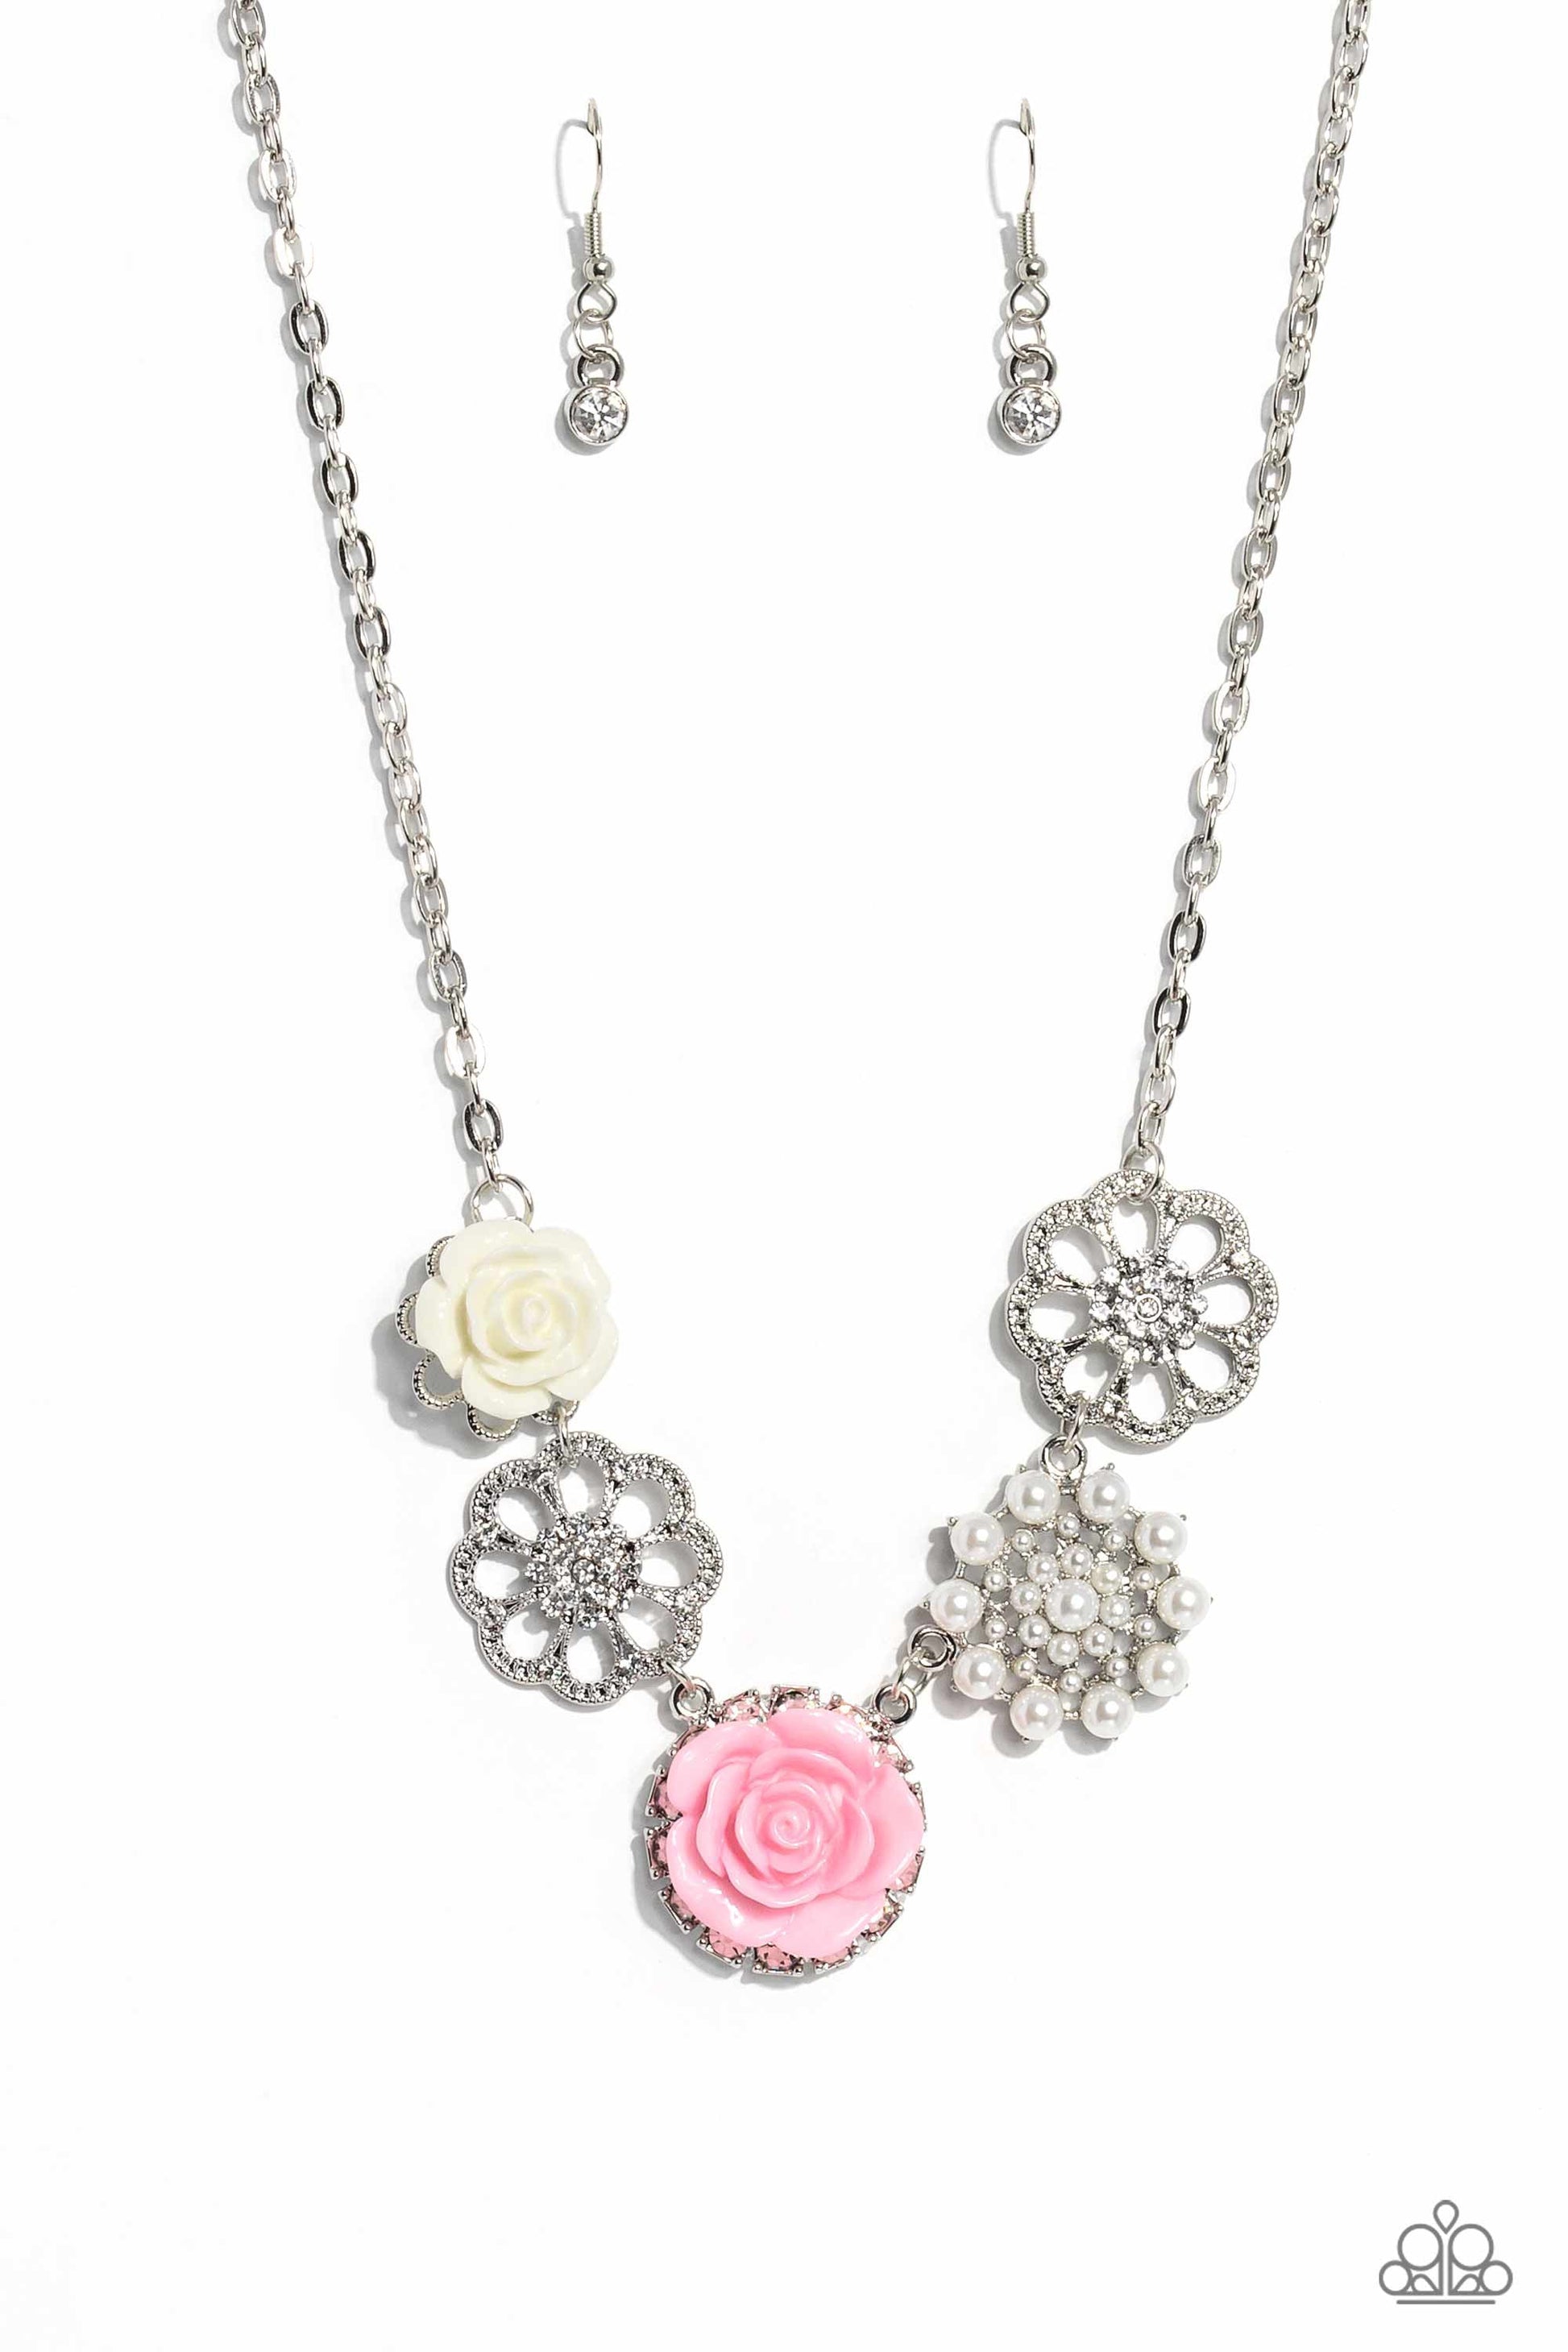 Tea Party Favors - Pink and Silver Necklace - Paparazzi Accessories - A collection of whimsical, refined flowers gathers along a flat, sleek silver link chain. The featured charms include an ivory resin rose blooming atop a glittery silver floral silhouette, two silver flowers dusted with dainty white rhinestones and studs around its petals and centers, a baby pink resin rose blooming atop a fan of white gems, and a pearl-petaled and centered flower creating a floral fantasy around the collar.